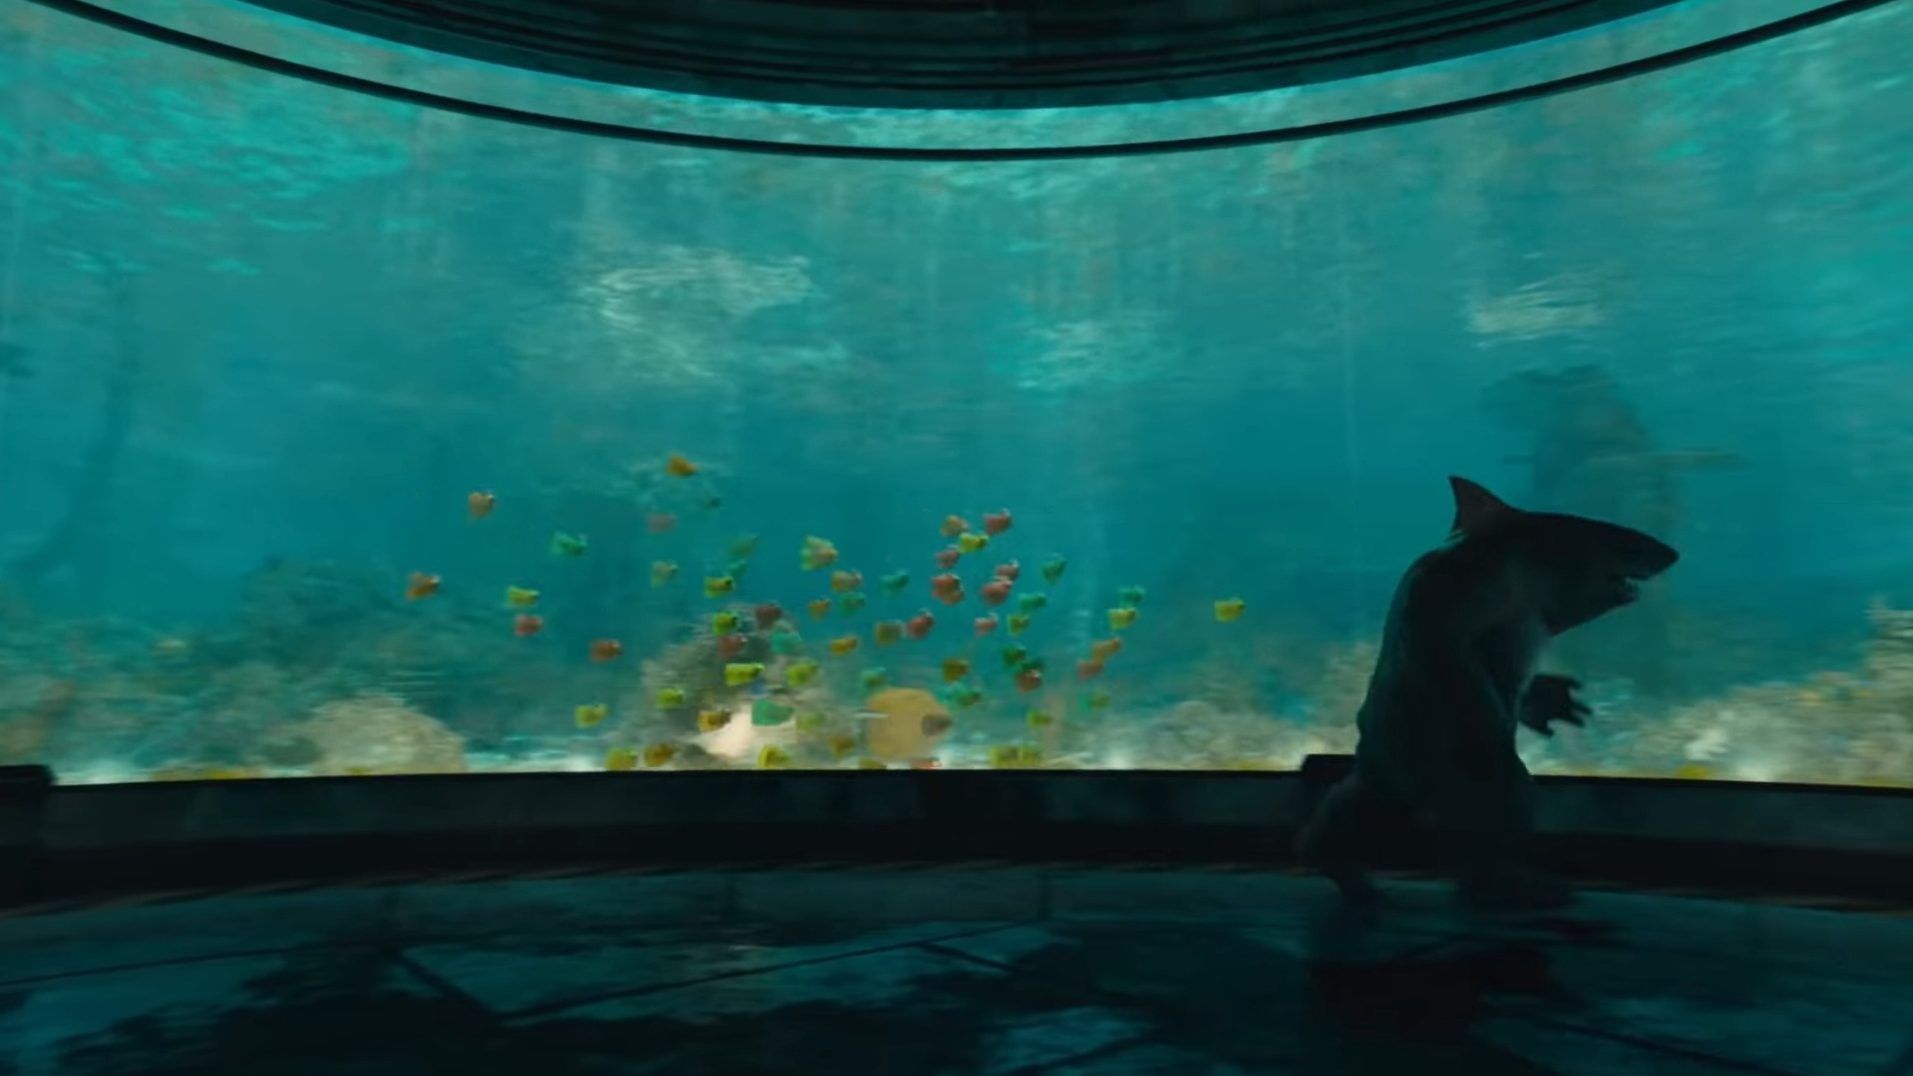 King Shark running with mutant fish in a huge aquarium as seen in the latest DC film THE SUICIDE SQUAD directed by James Gunn.